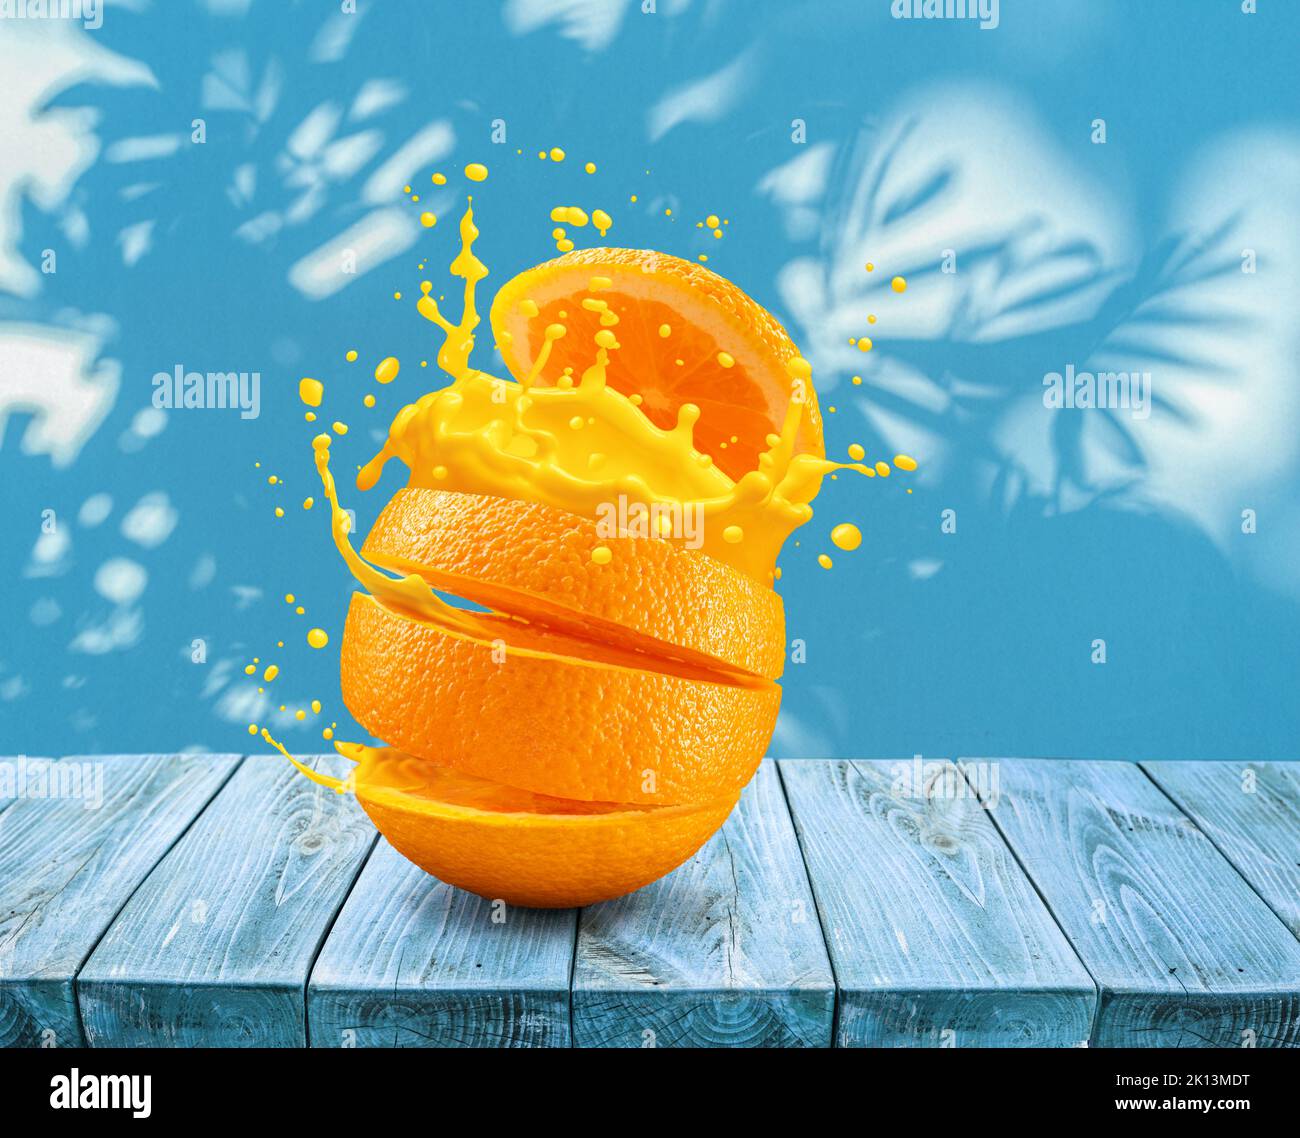 Sliced orange fruit splashing about orange juice on blue table and wall with leaf shadows at the background. Stock Photo